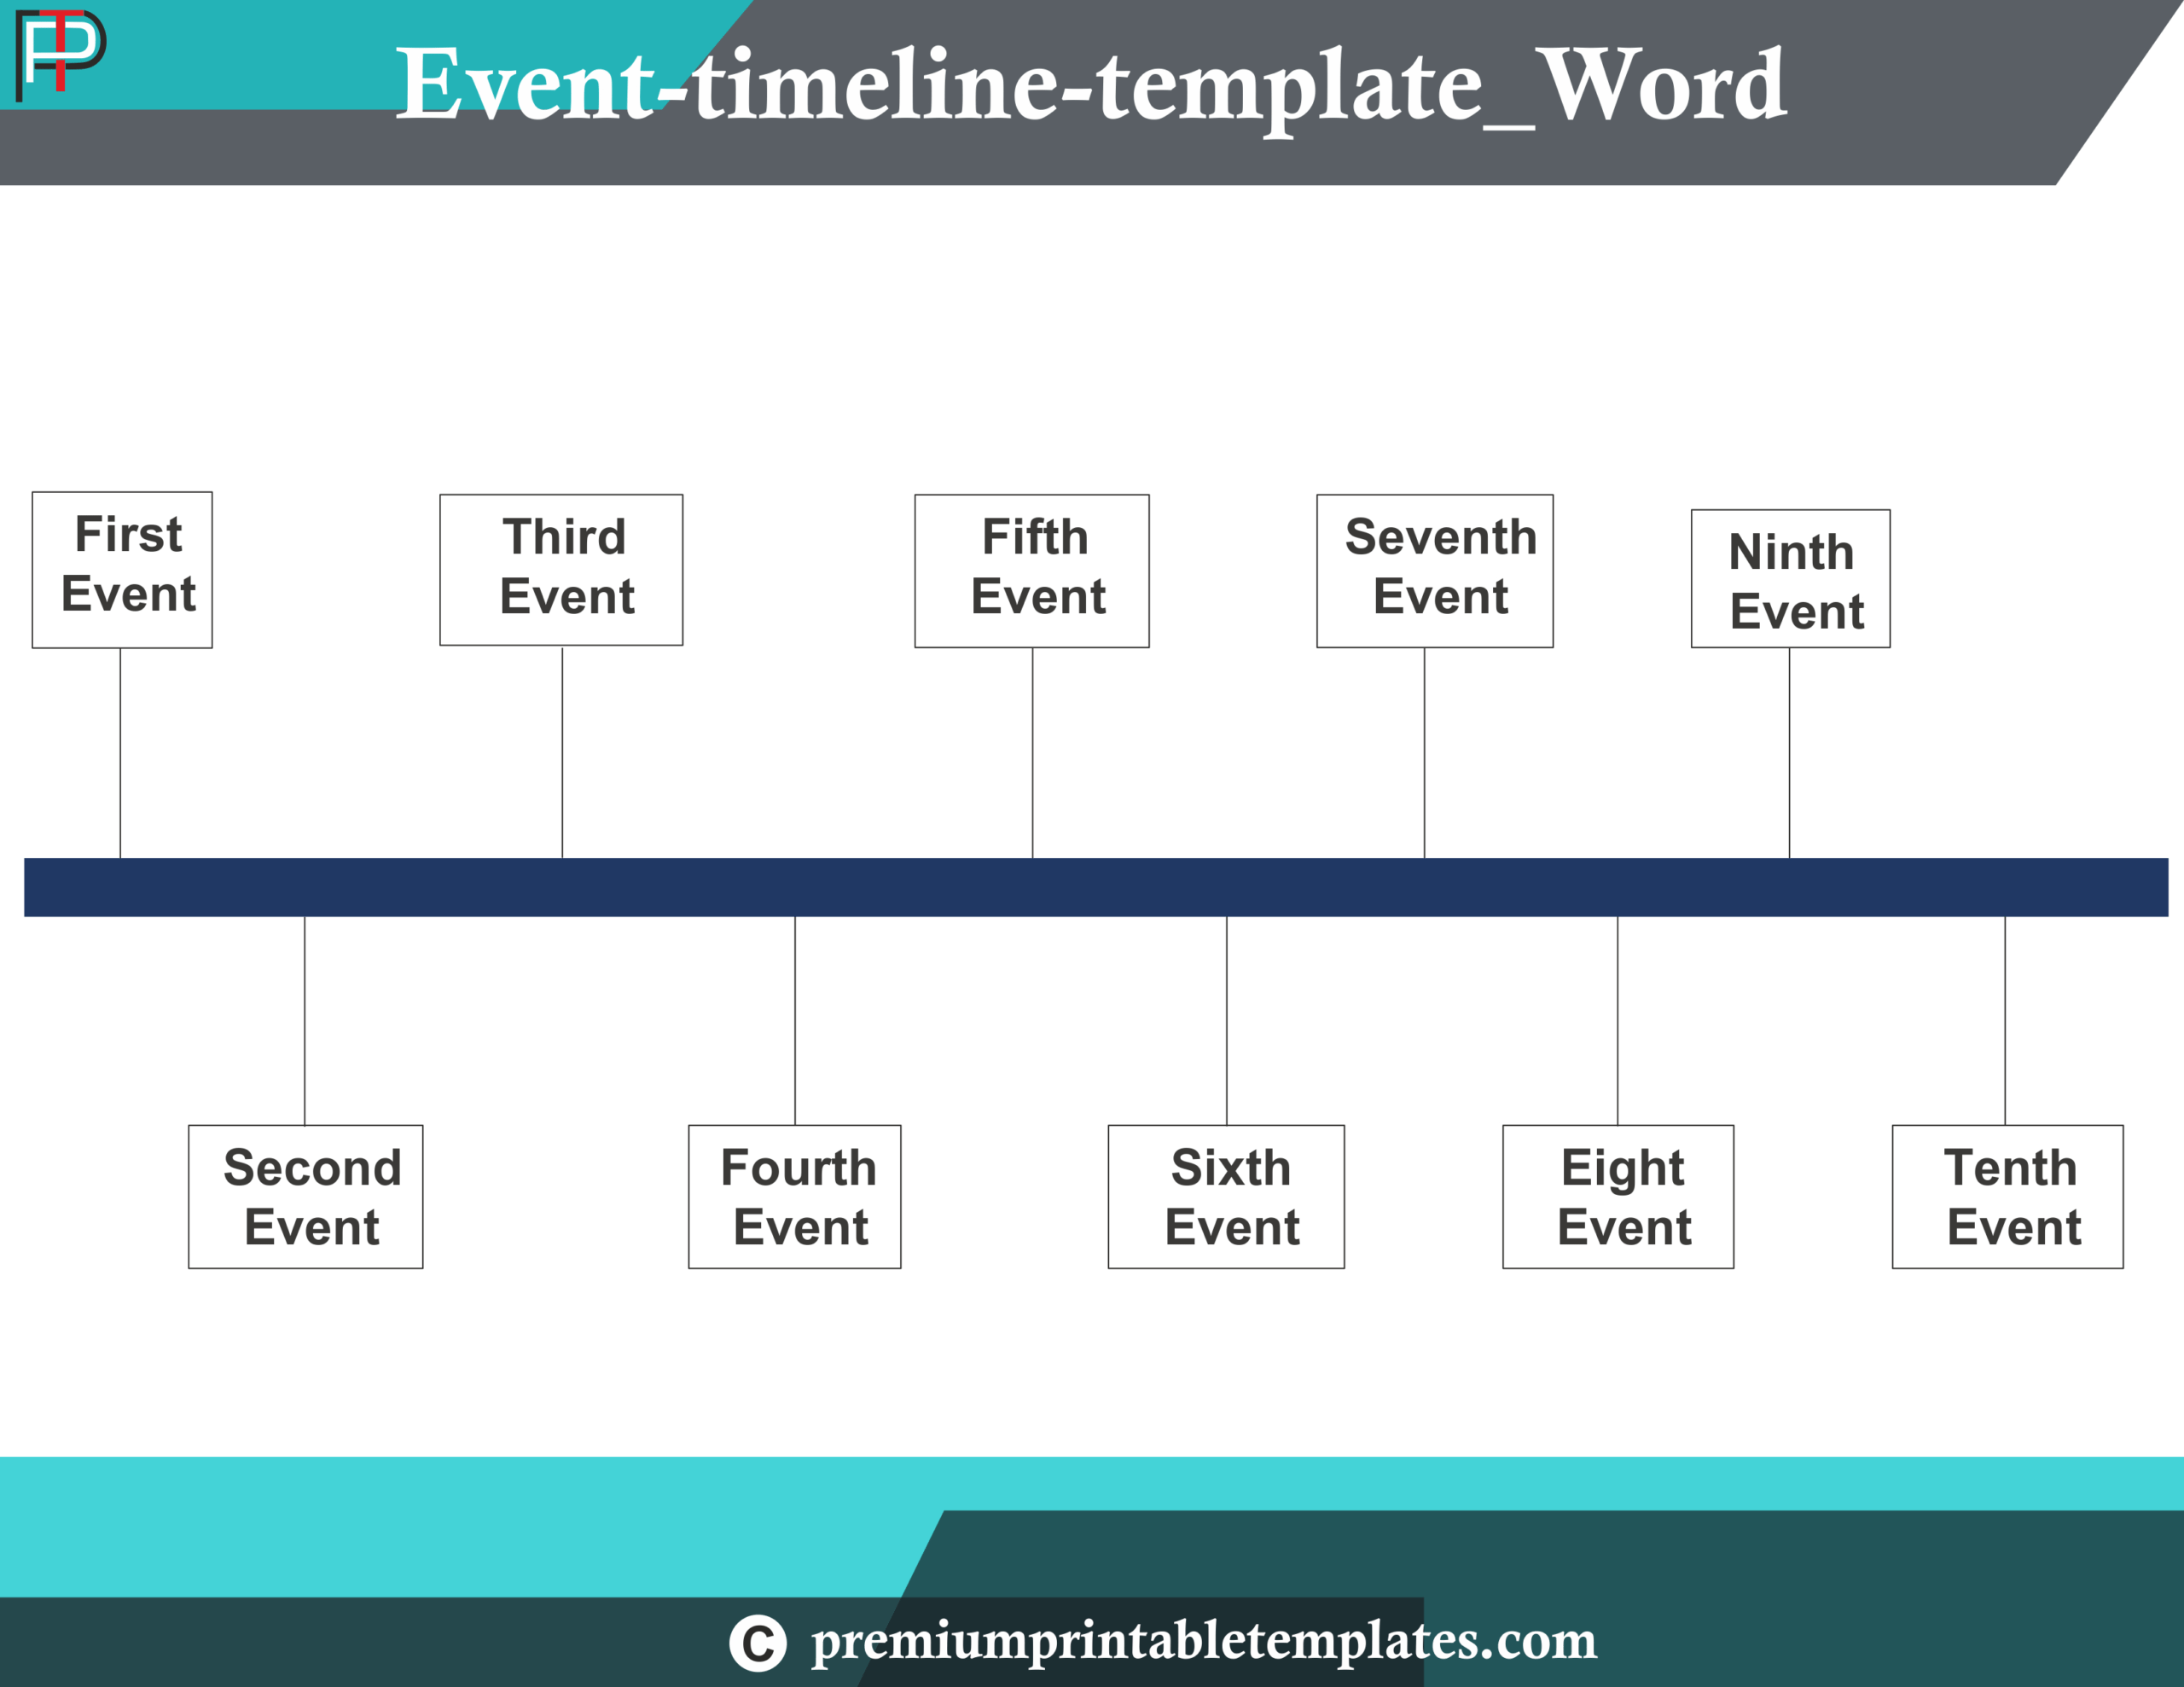 event-timeline-template-word-inside-what-is-a-template-in-word